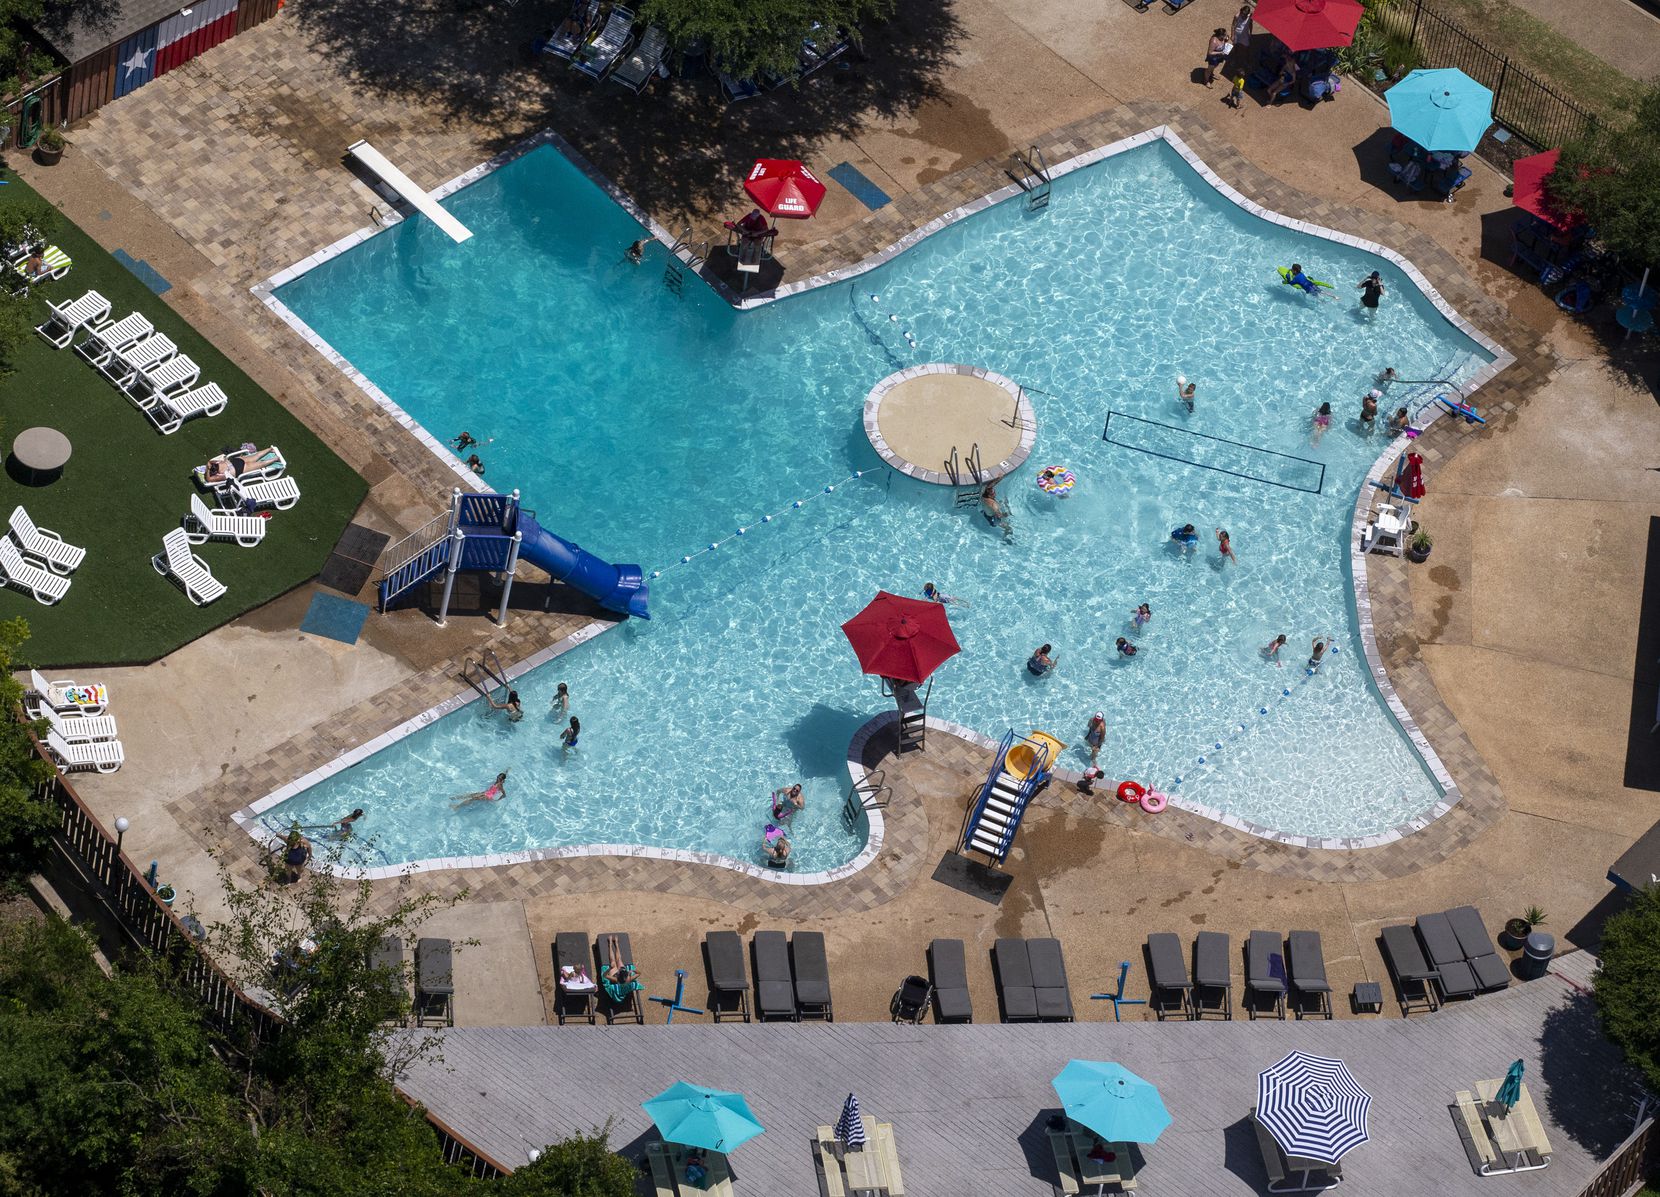 People enjoy the Texas Pool in Plano, Texas, on Thursday, June 18, 2020.